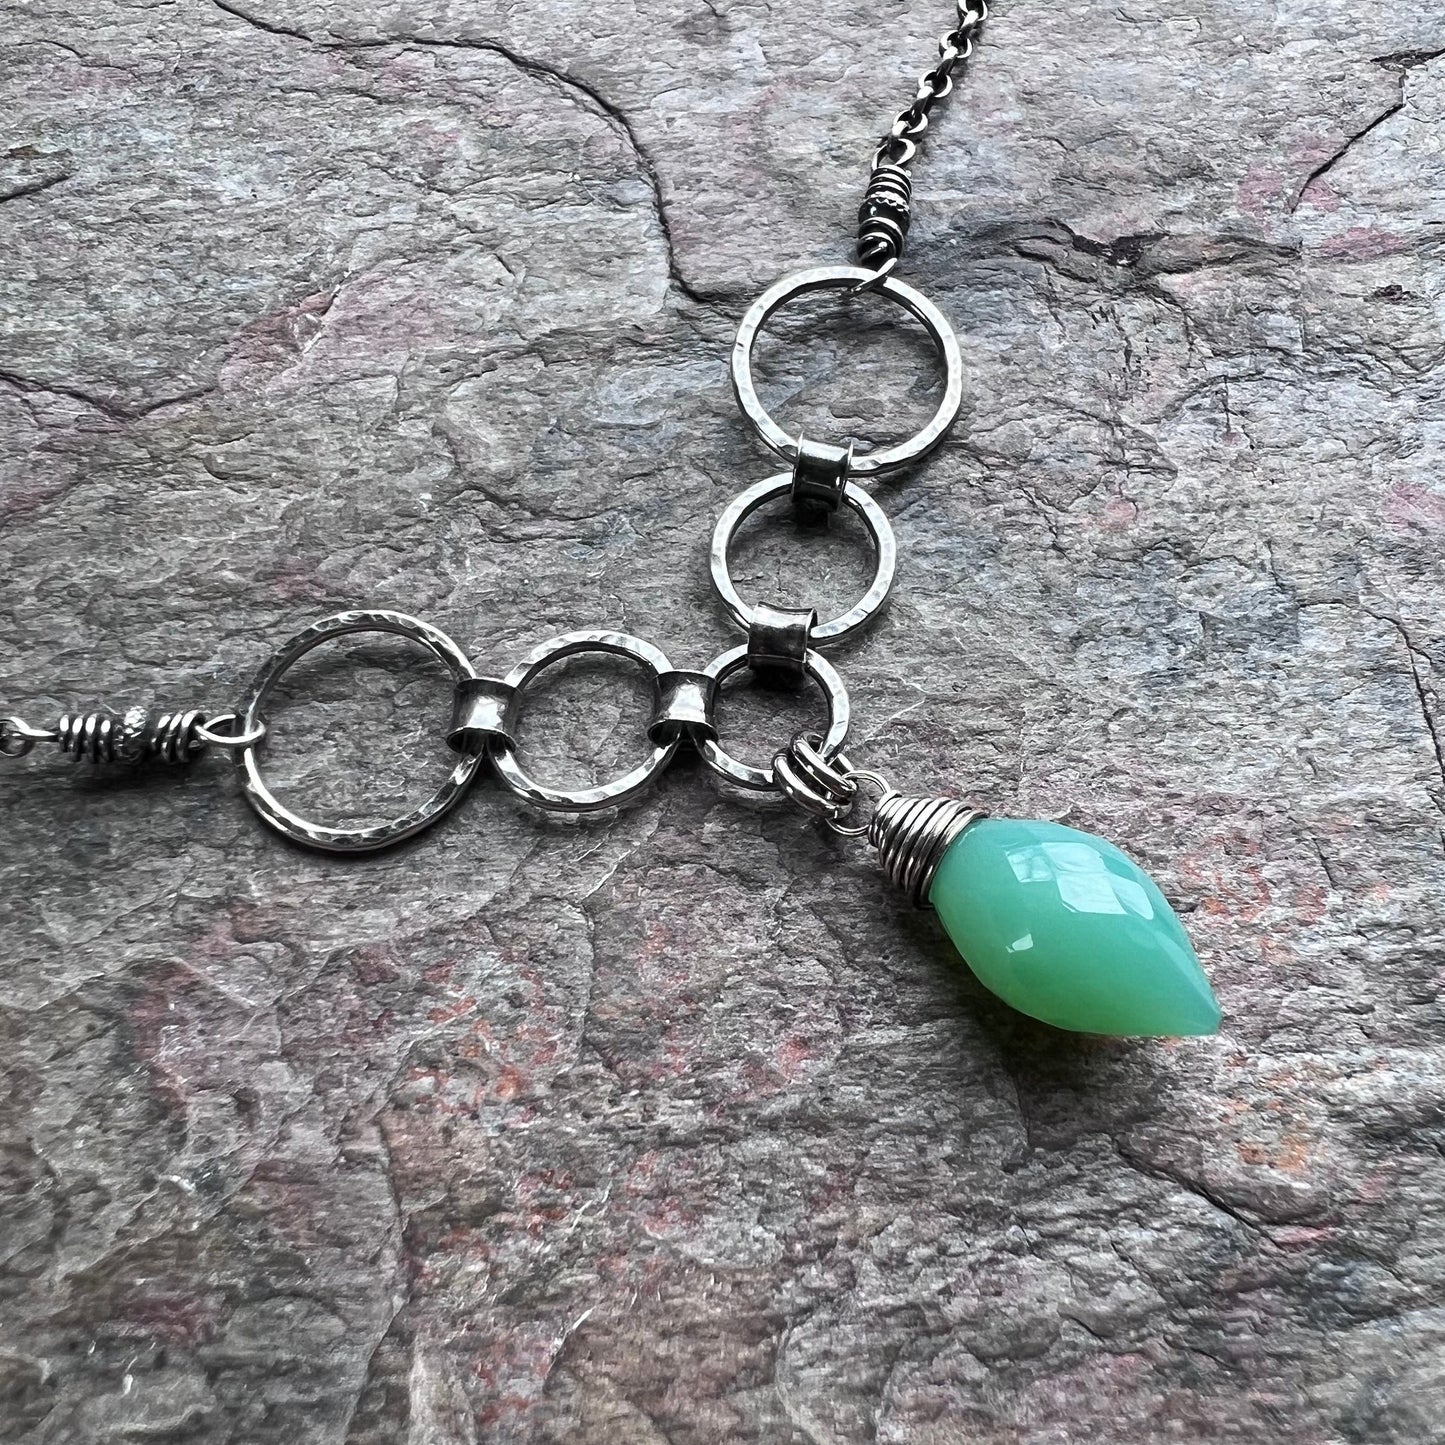 Sterling Silver Chrysoprase Necklace - Genuine Chrysoprase Pendant and Hammered Sterling Silver Circles on Sterling Silver Chain